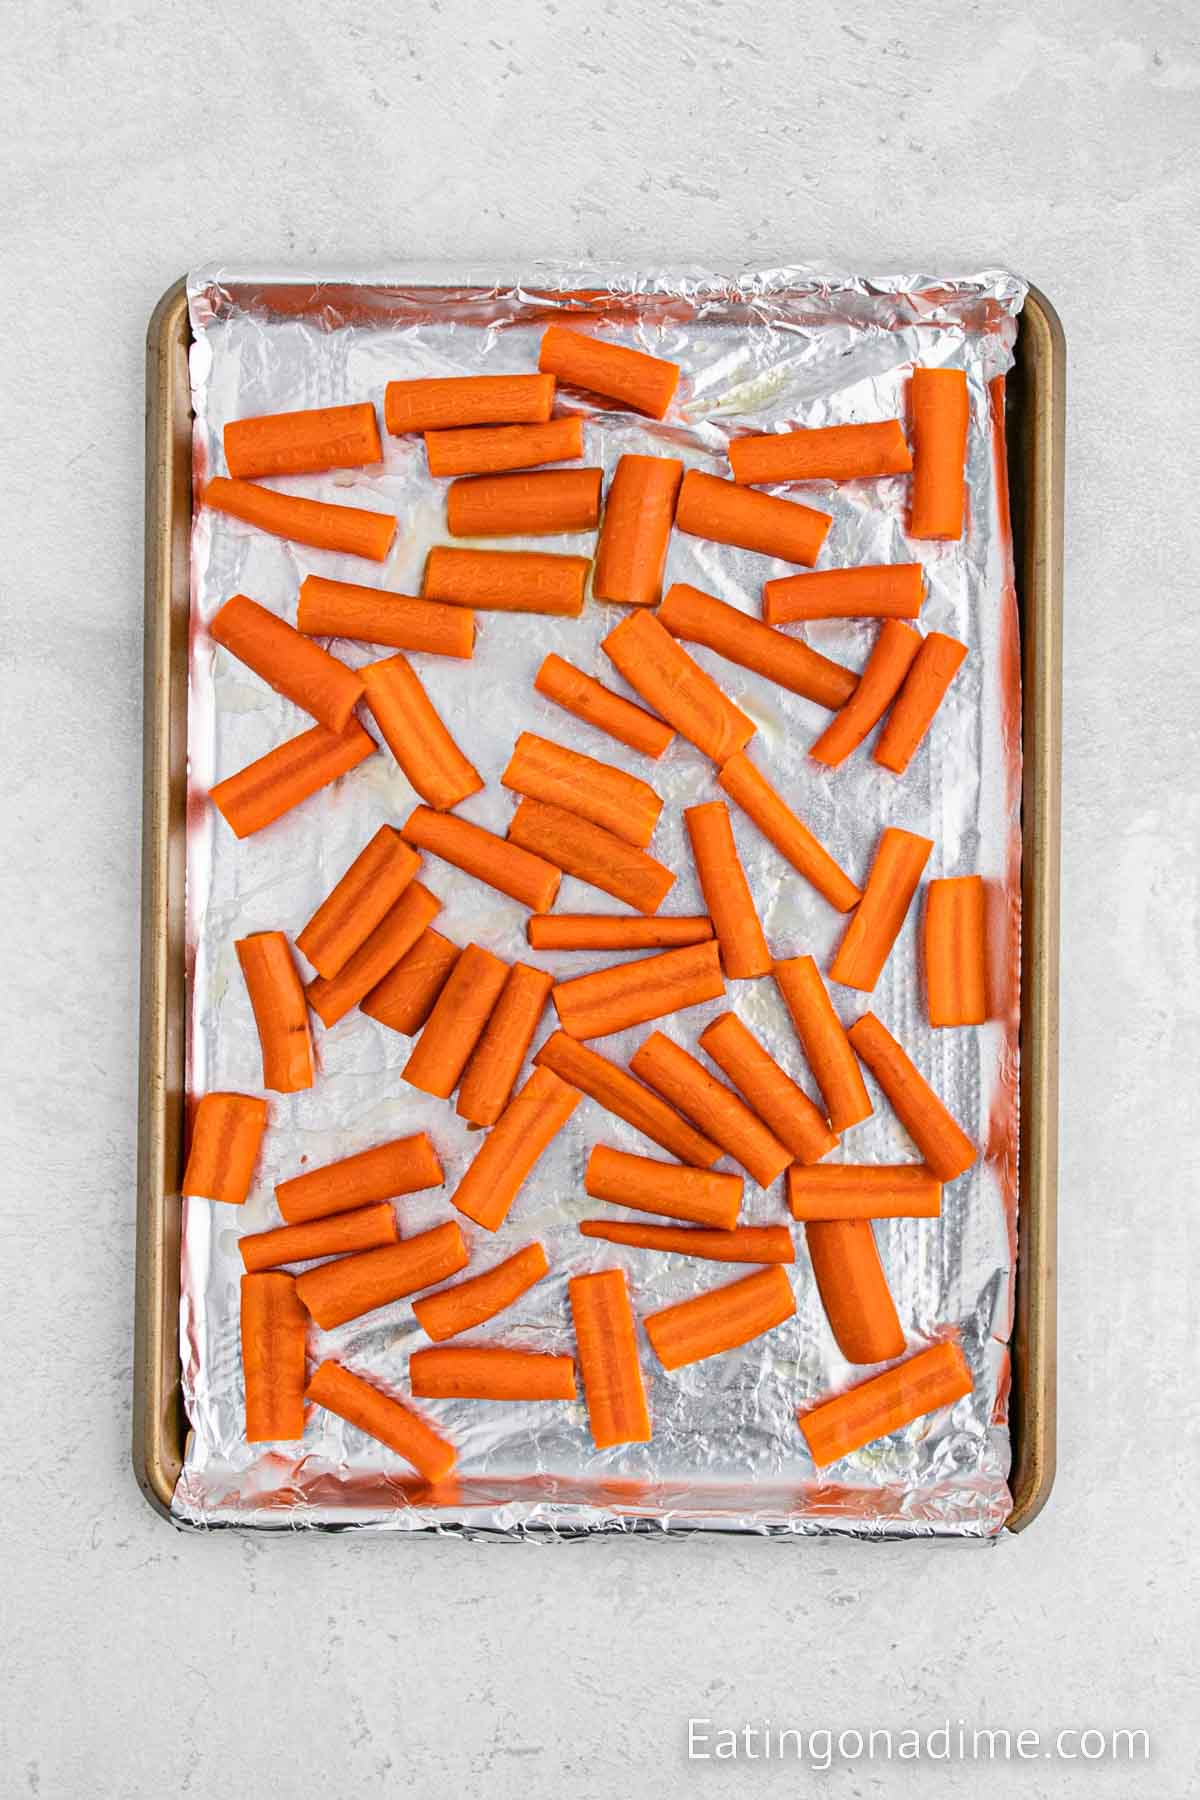 Placing the carrots on a foil lined baking sheet